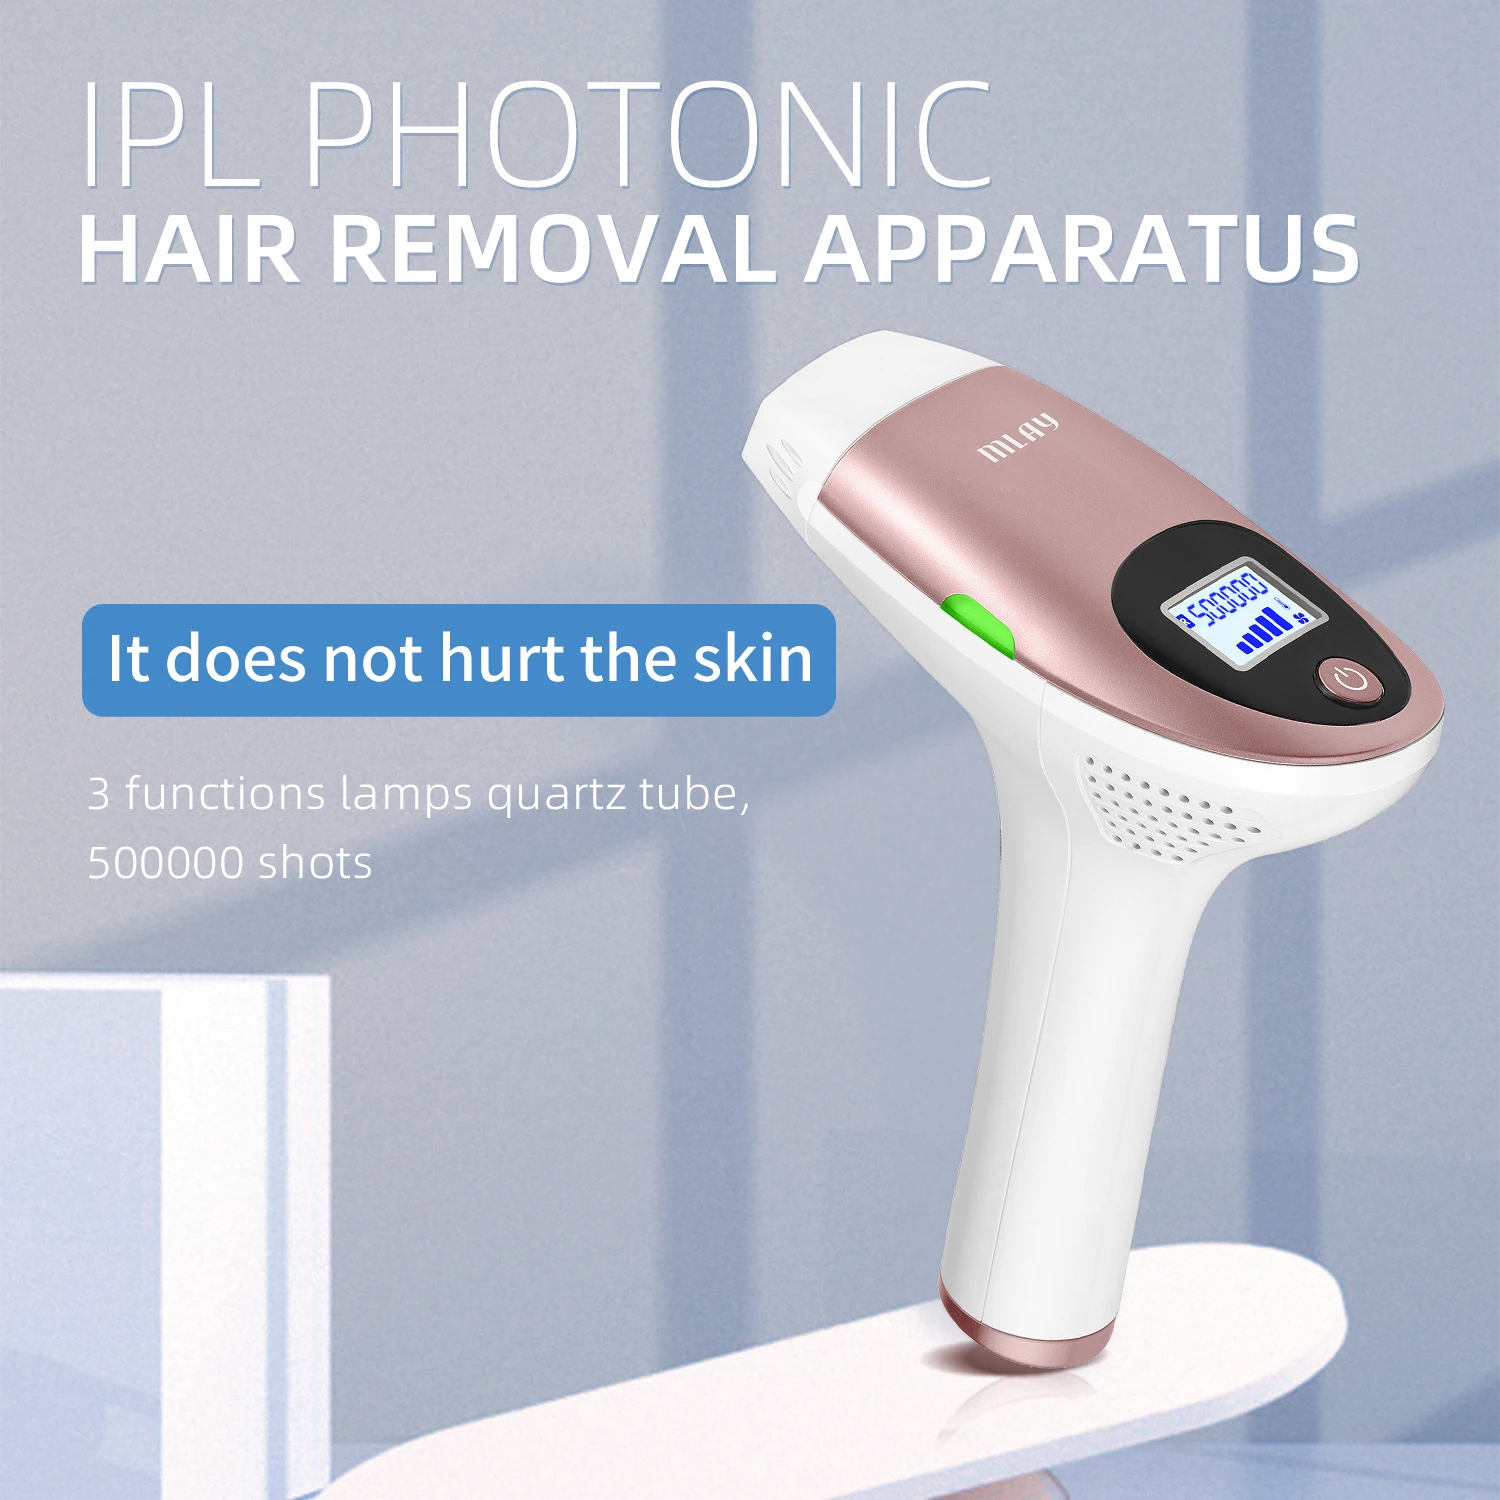 IPL Hair Removal Device Laser MLAY T3 Home laser hair removal ipl machine Replaceable lamp head 500000 flashes